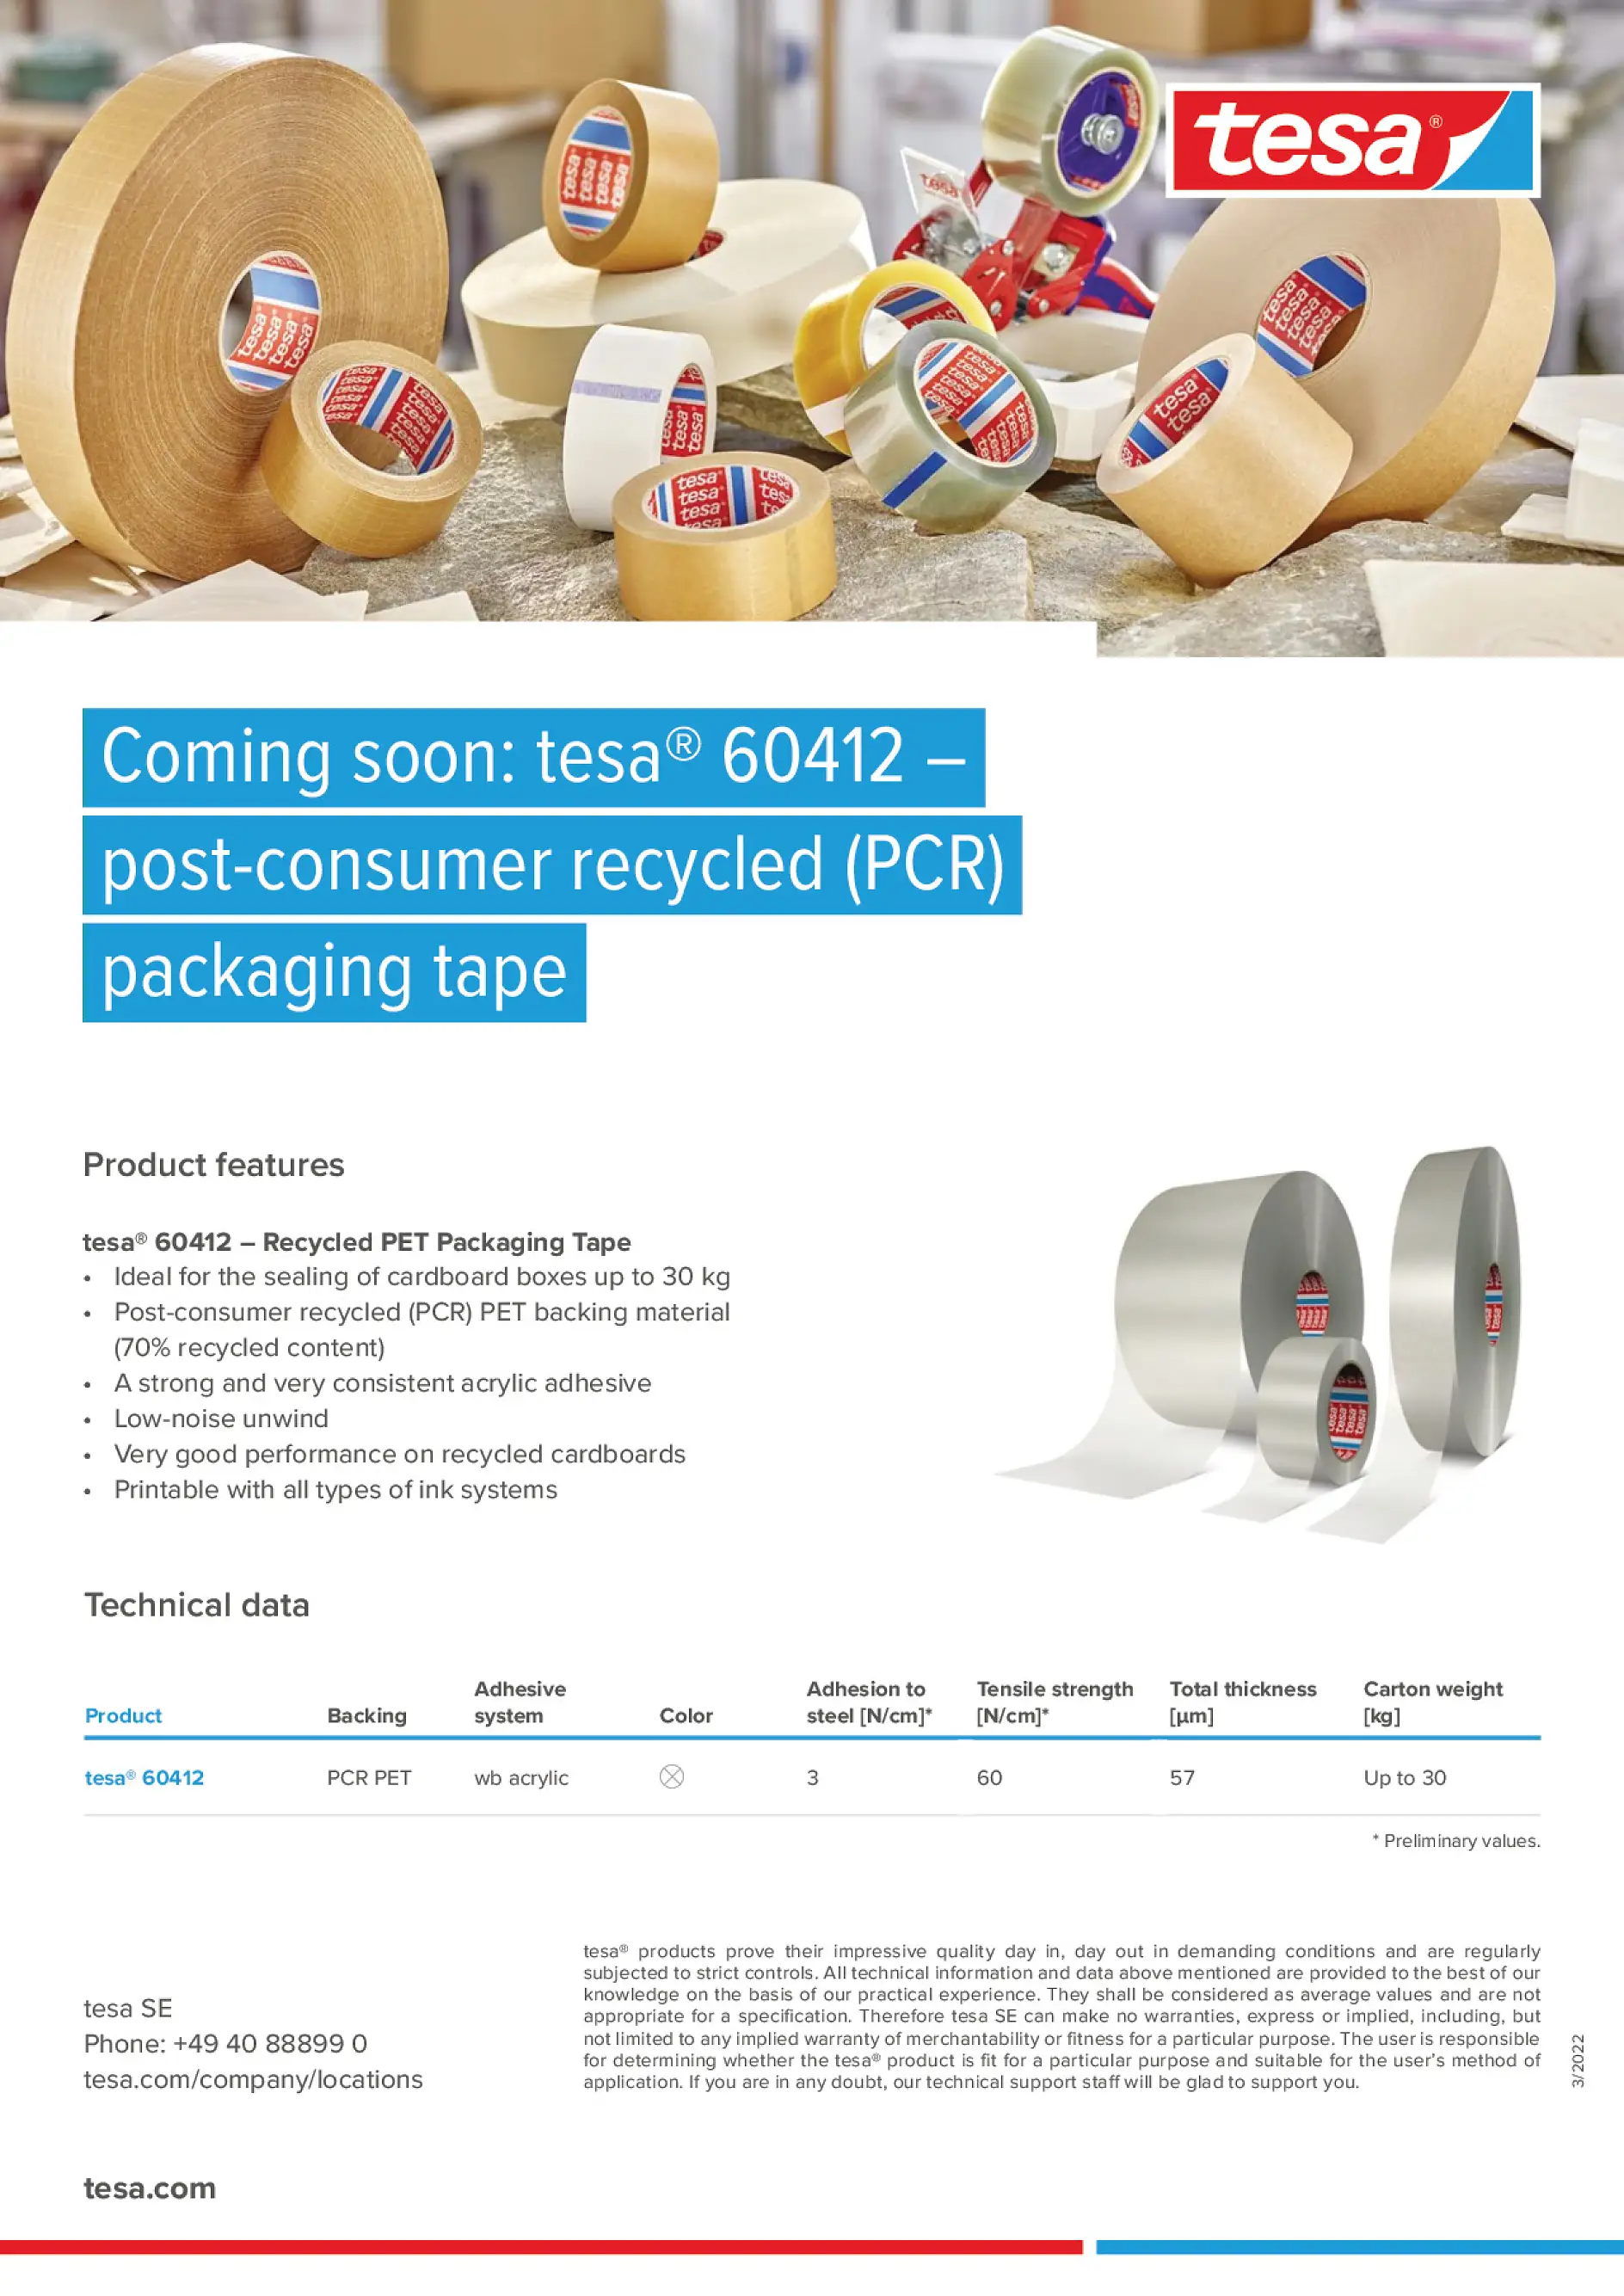 tesa_Sustainable_Packaging_Tapes_One-pager_EN